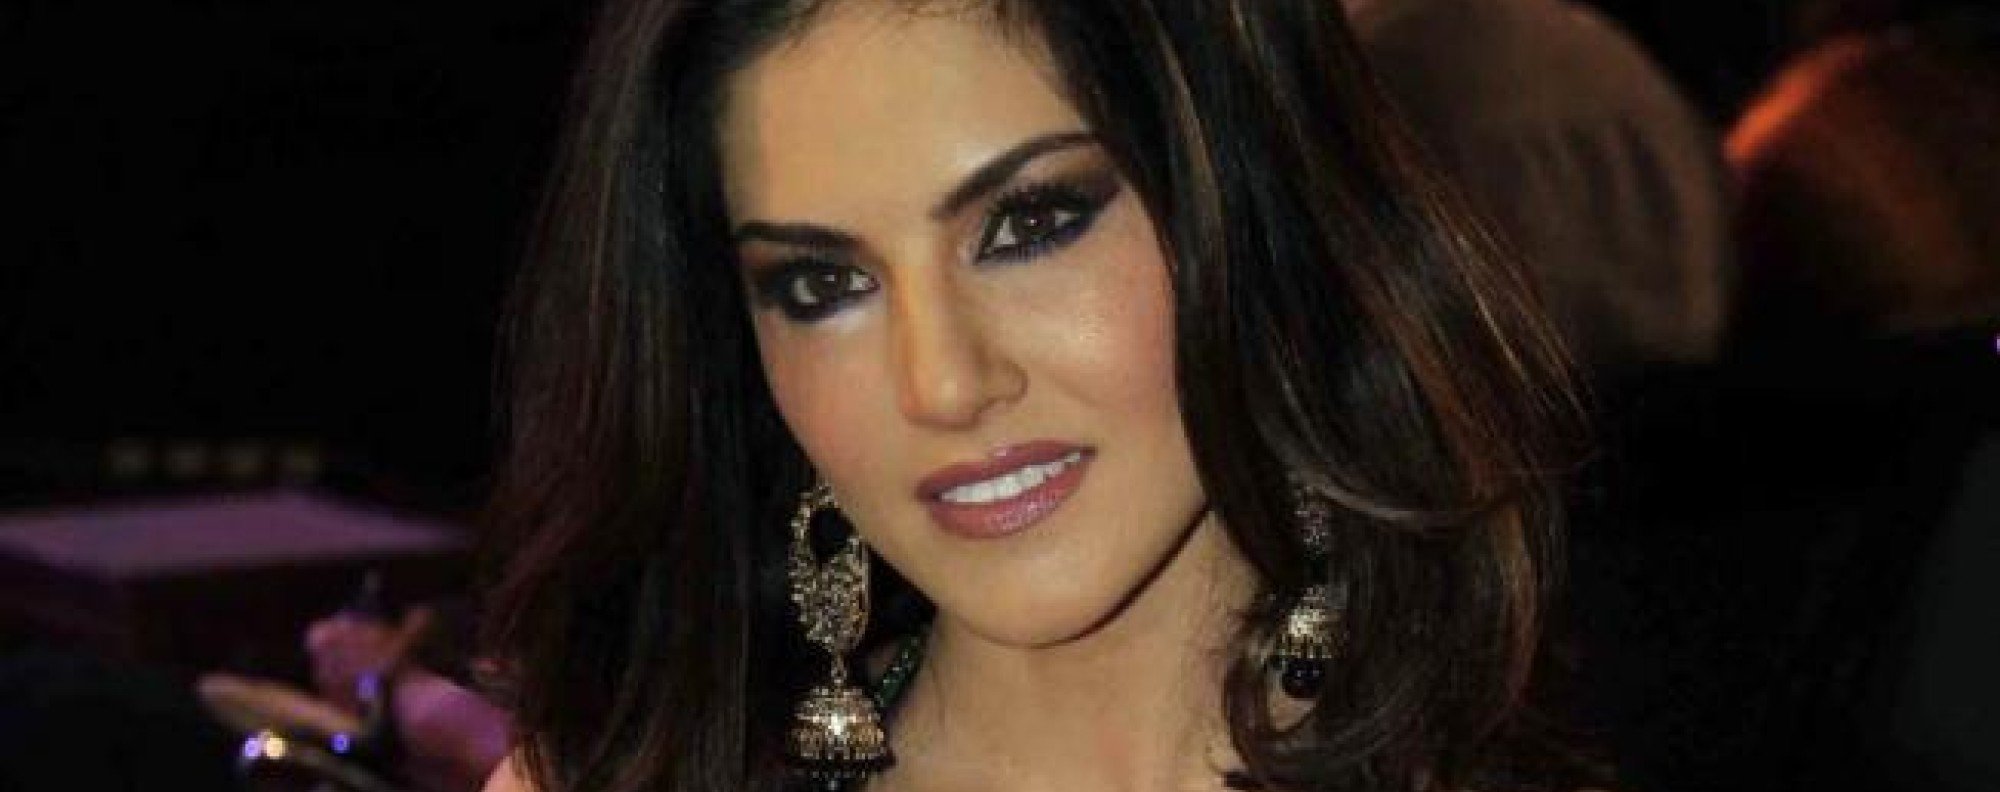 Kidnep Sex In Rep Sex Video - Rape crisis in India leads to calls for porn star Sunny Leone to be jailed  | South China Morning Post